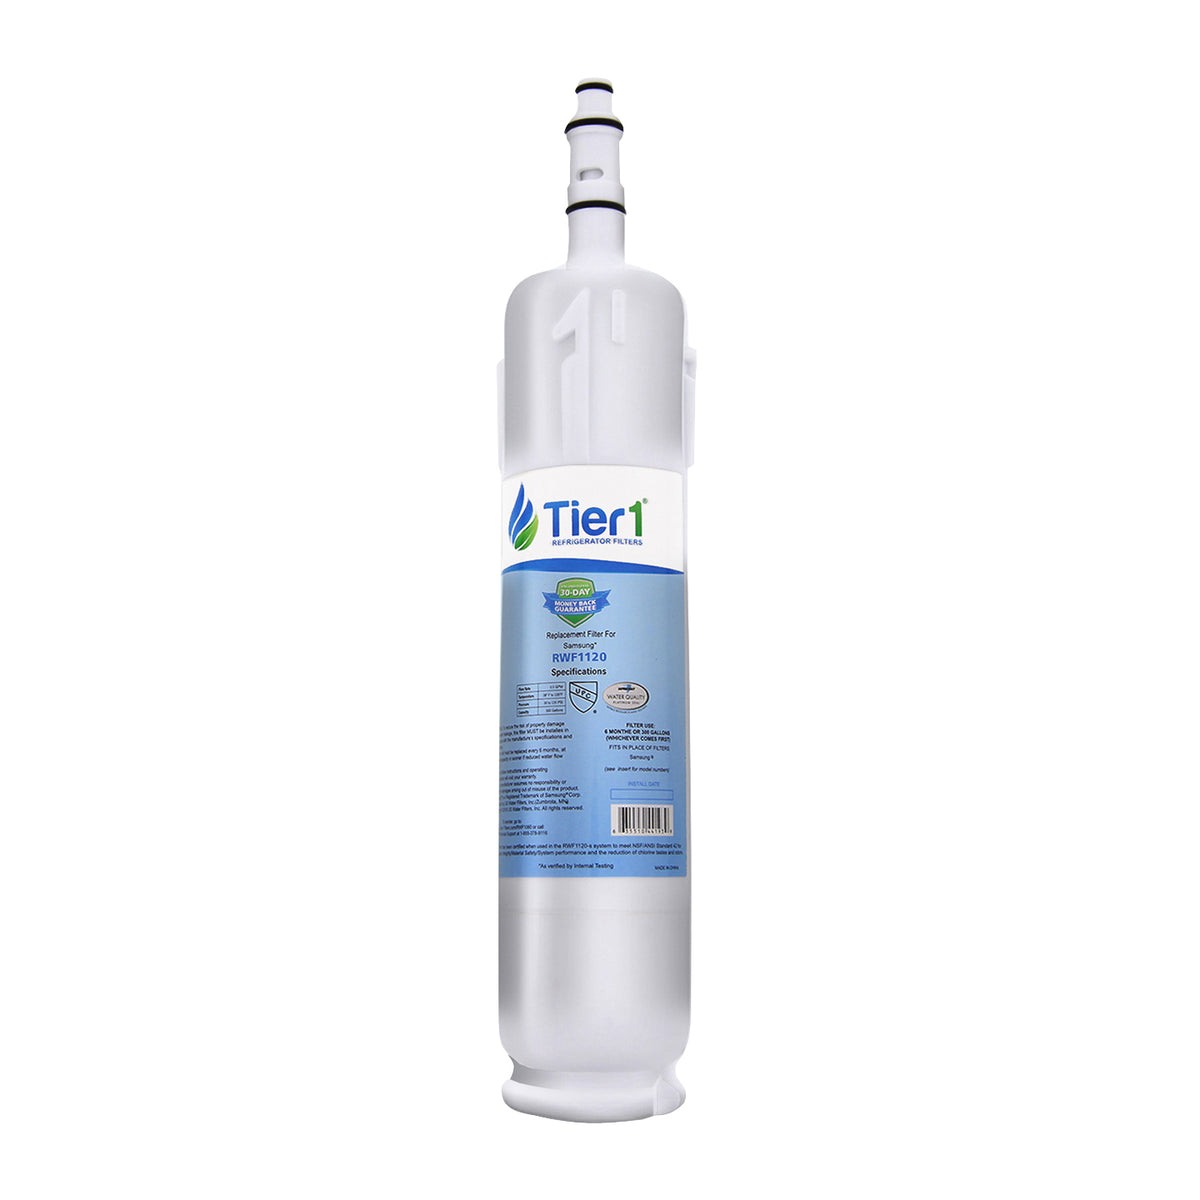 Samsung DA29-00012B Refrigerator Water Filter Replacement Comparable by Tier1